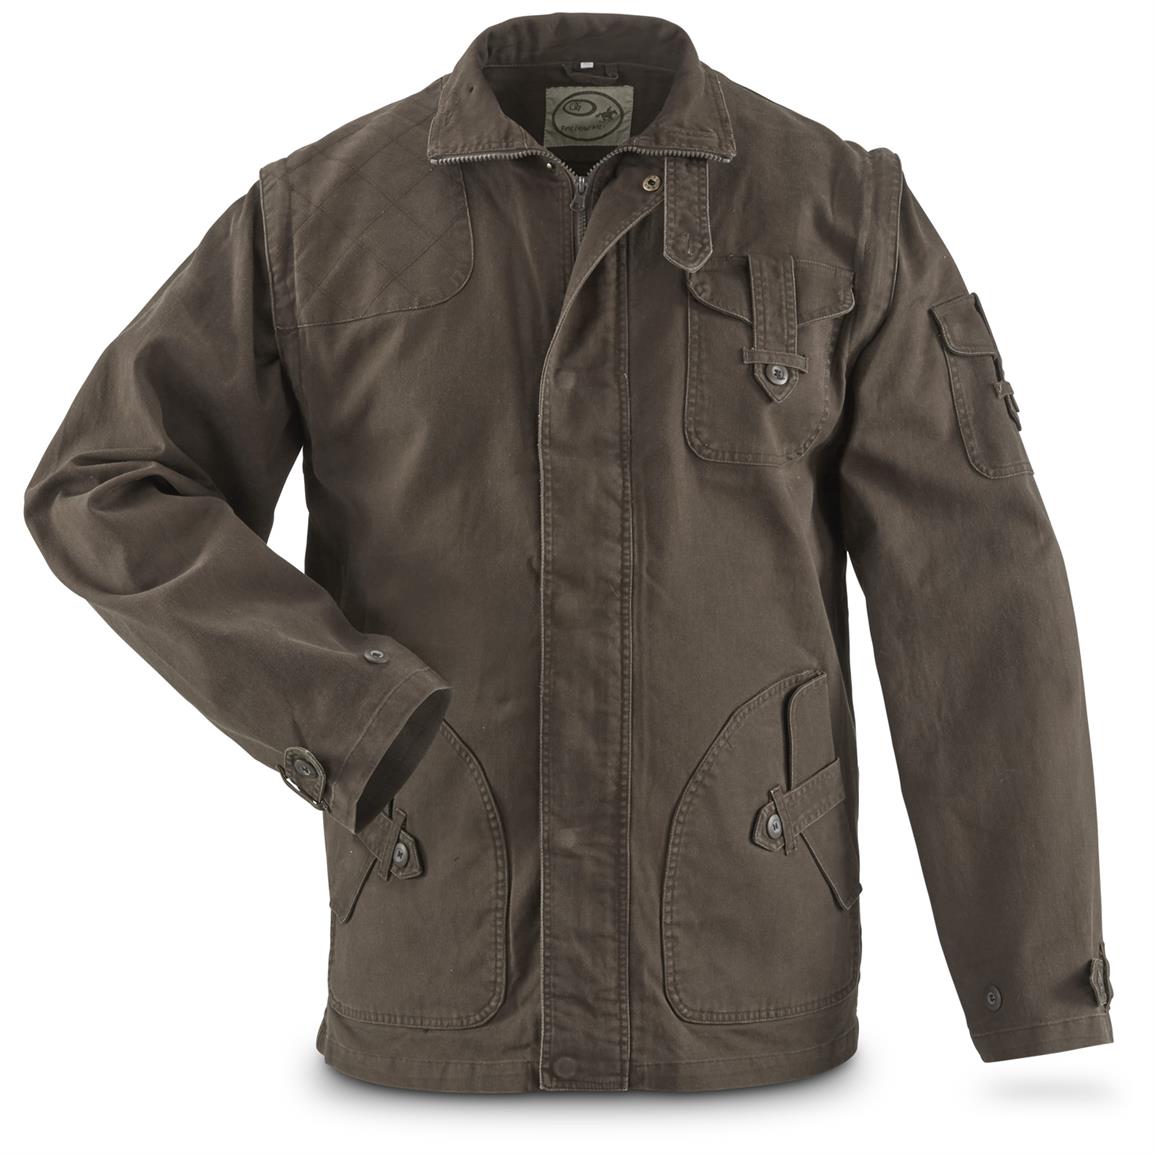 Men's Hunting Jacket with Zip Off Sleeves - 660502, Uninsulated Jackets ...